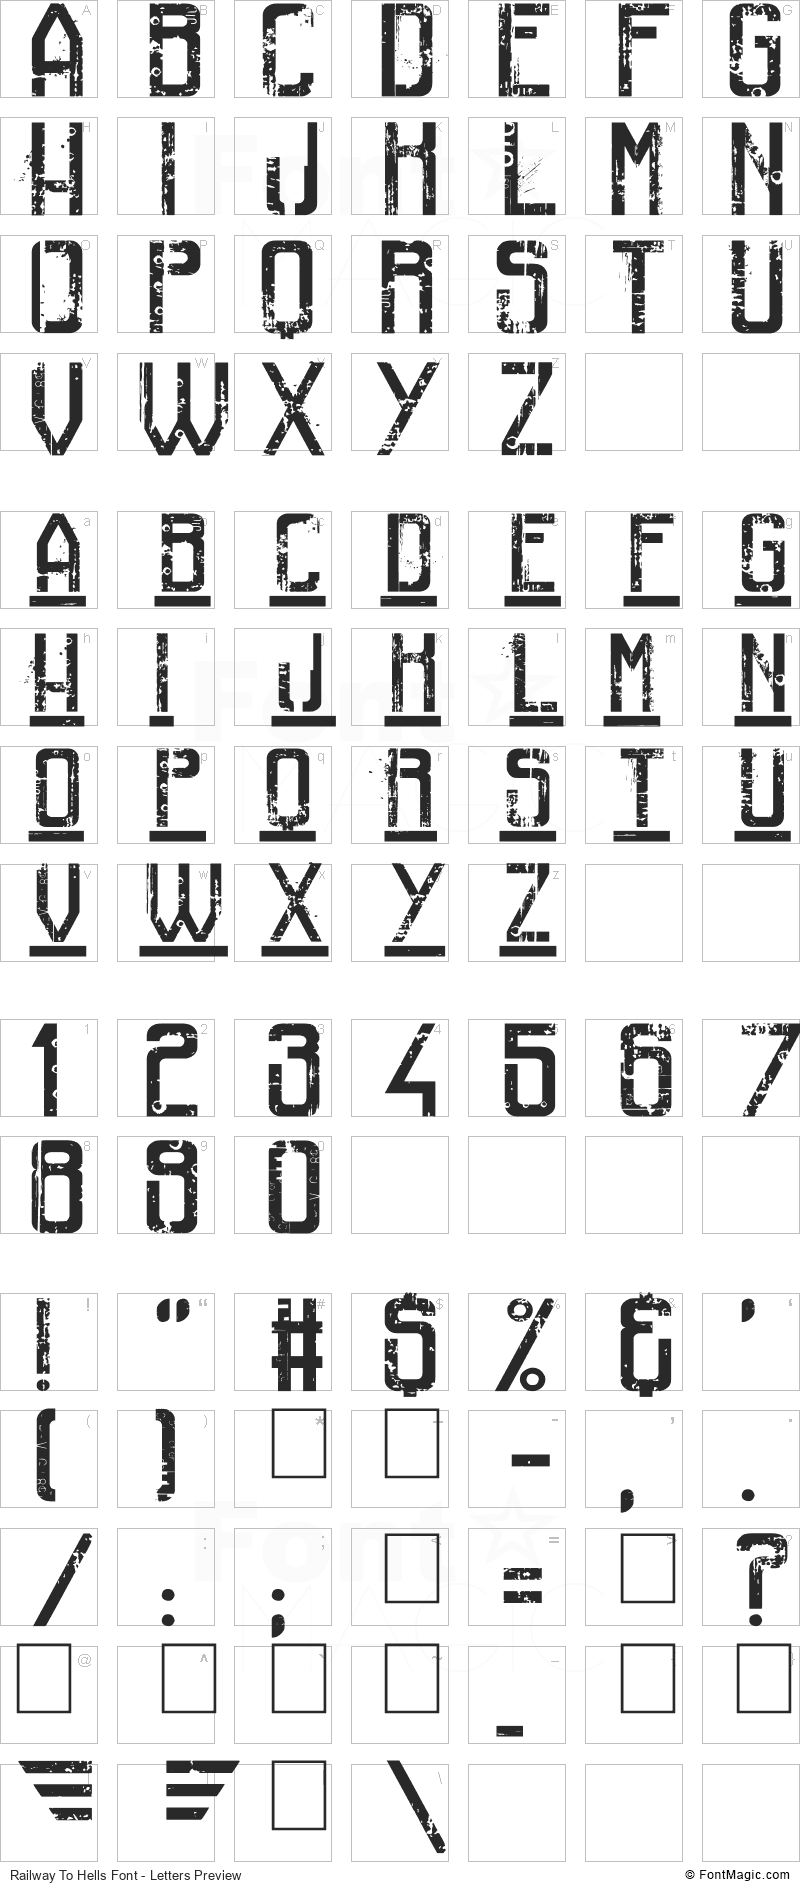 Railway To Hells Font - All Latters Preview Chart